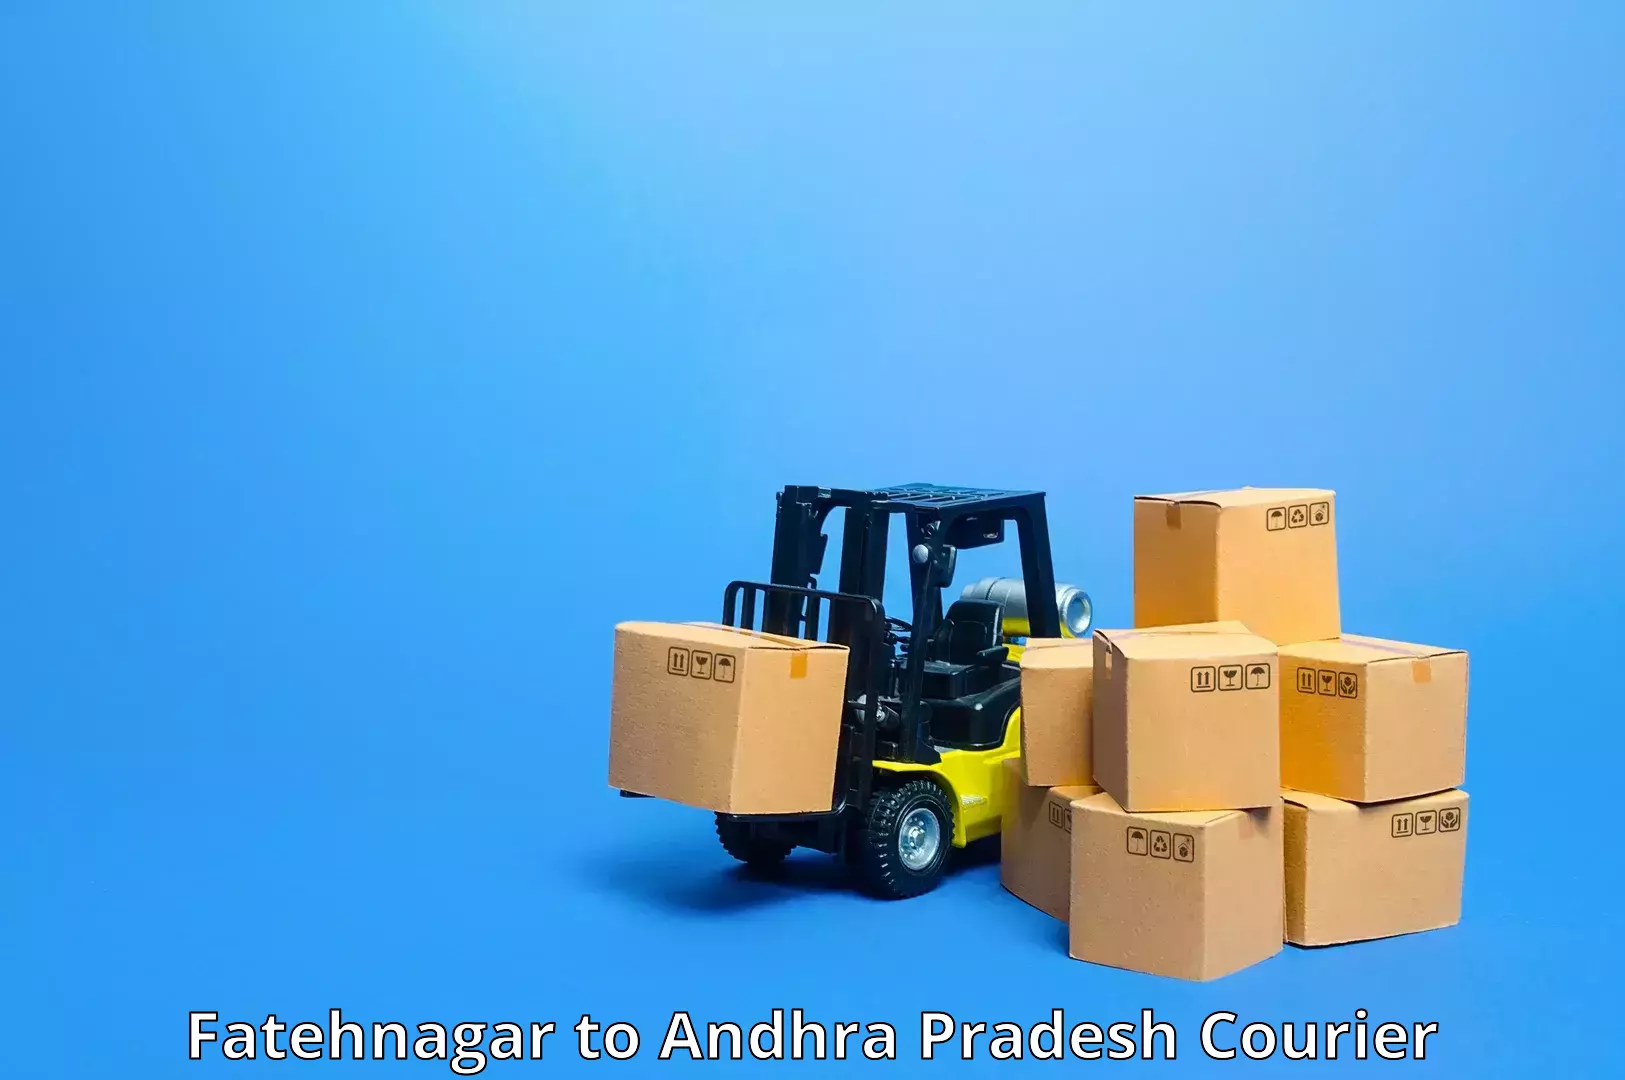 Corporate courier solutions Fatehnagar to Tripuranthakam